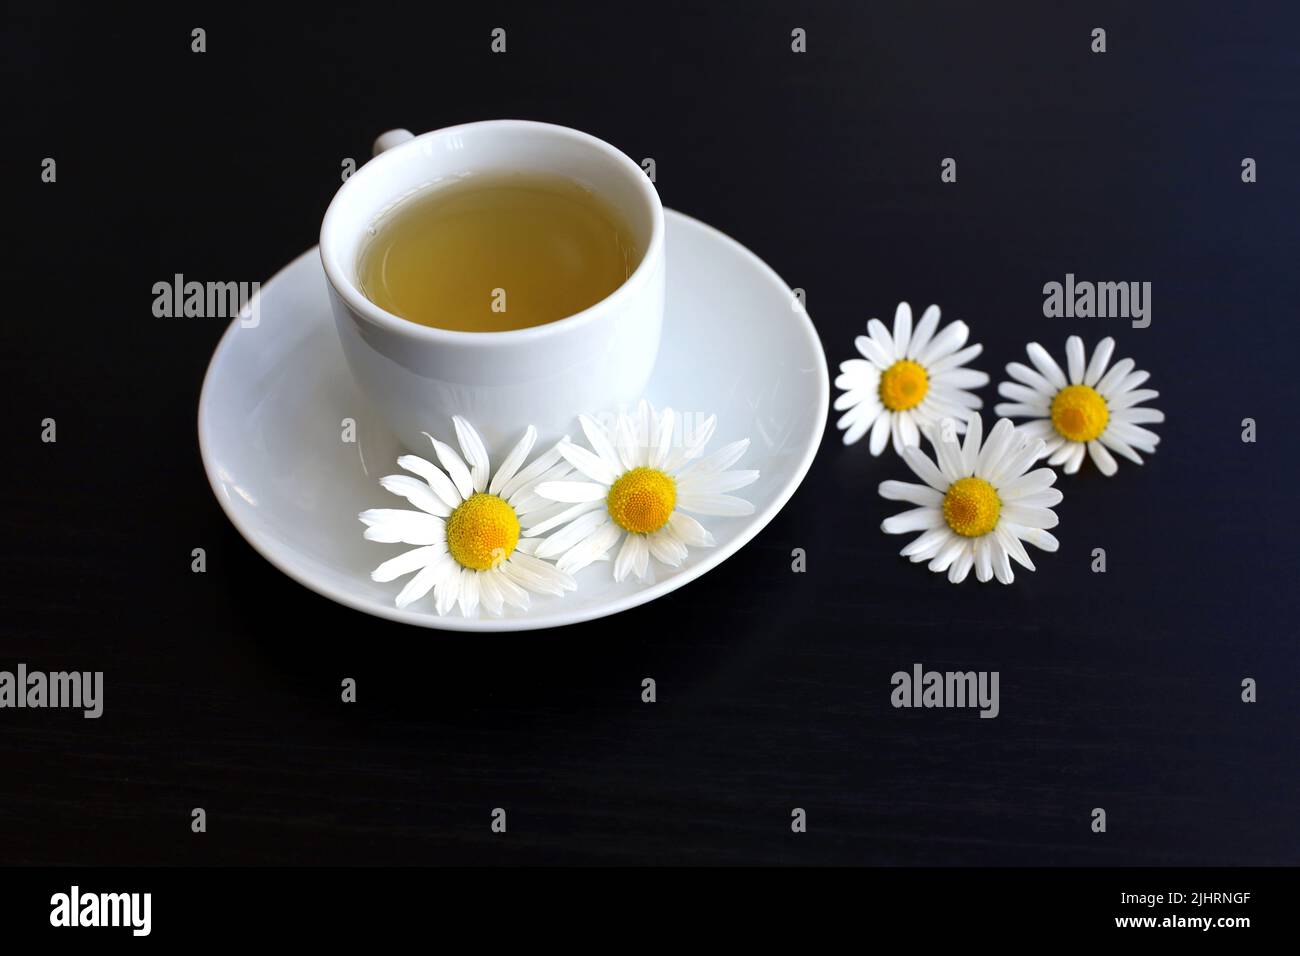 Chamomile tea in a white cup, daisy flowers on saucer. Healing herbal drink on dark wooden table Stock Photo